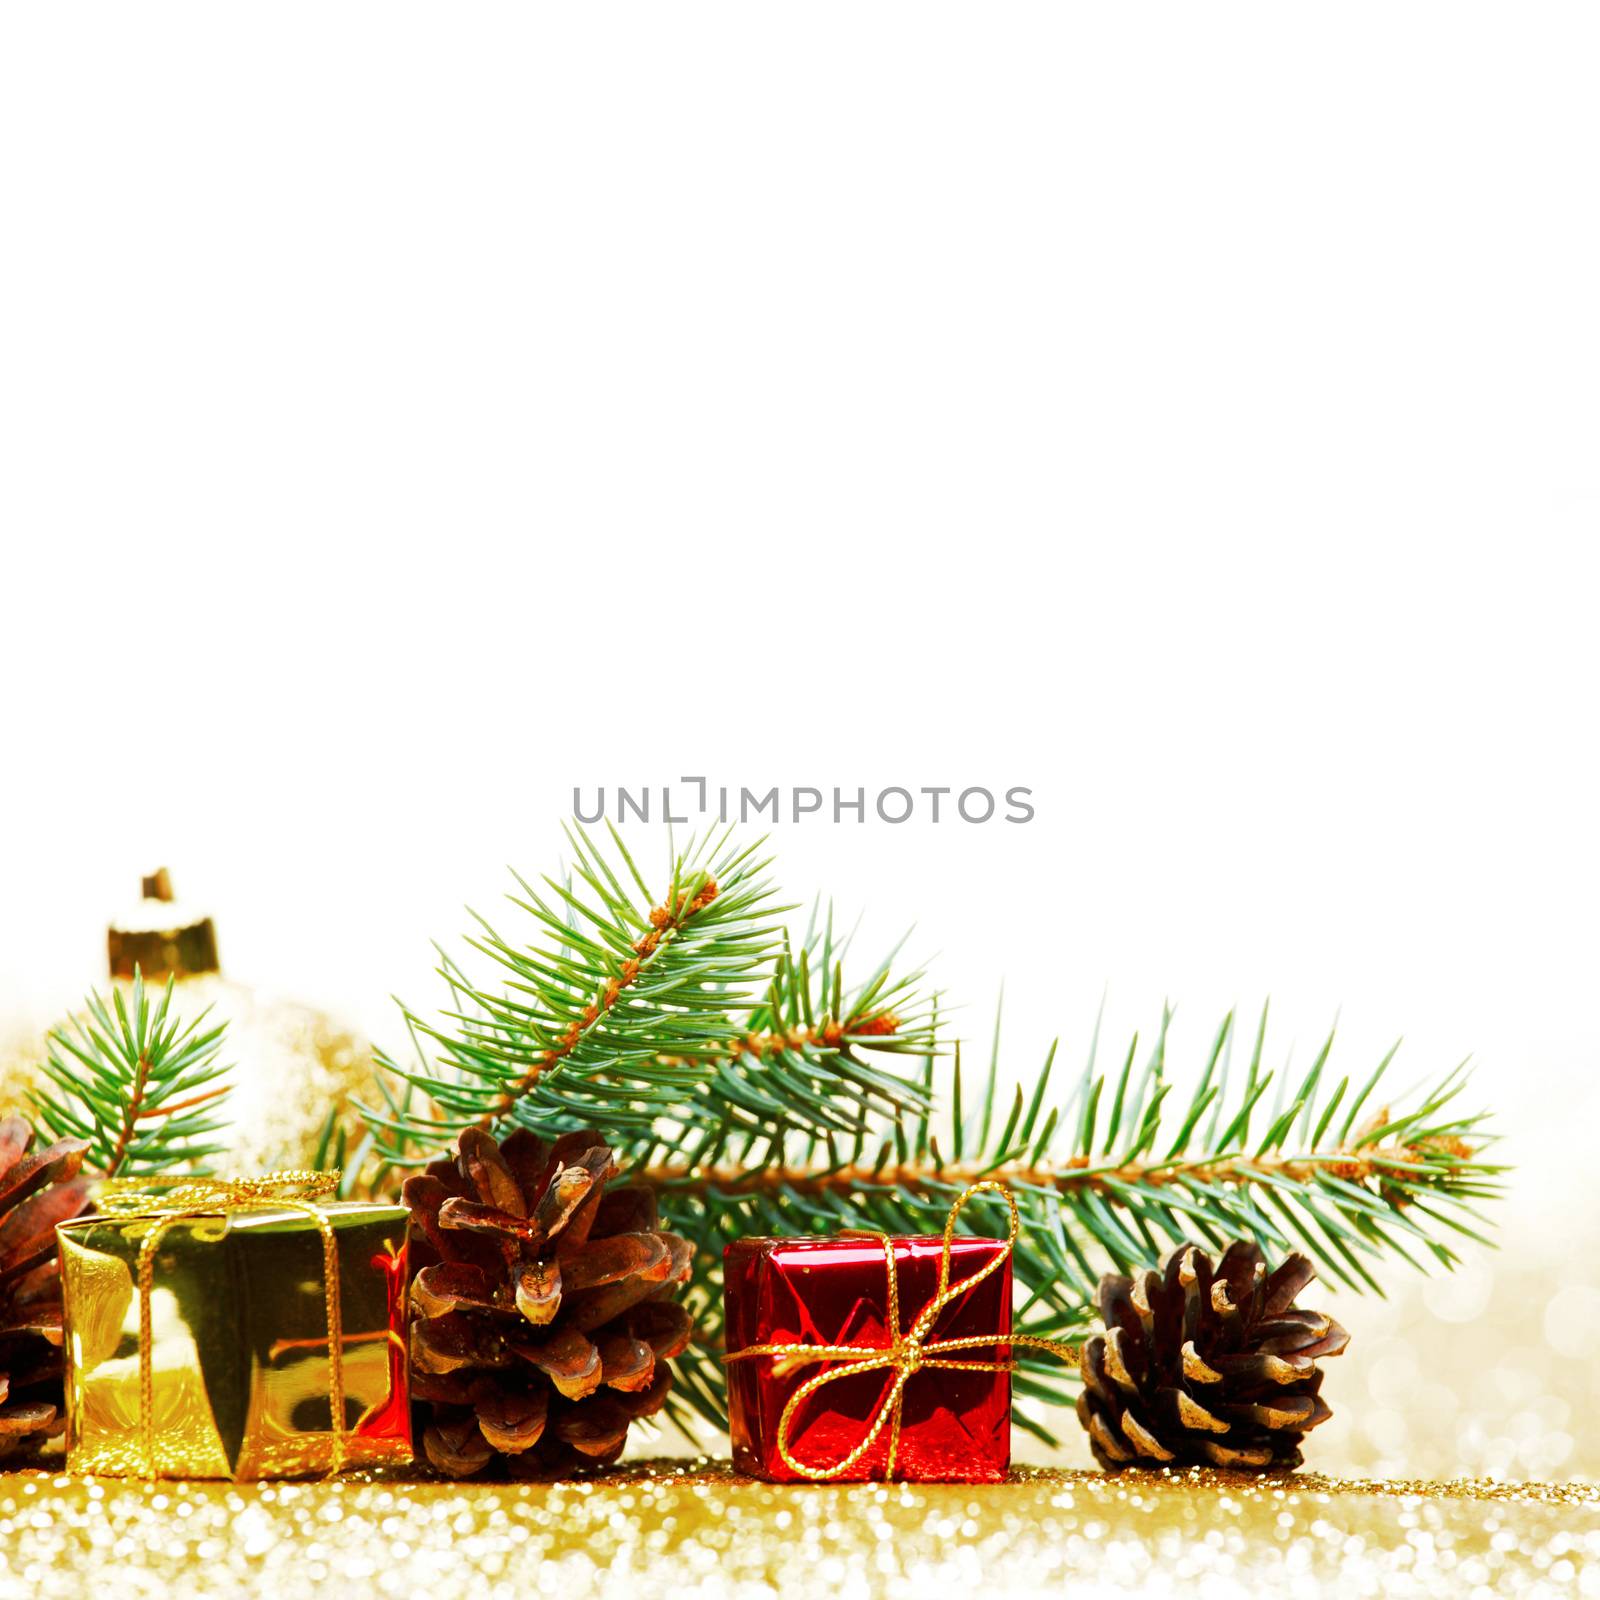 Christmas card with fir tree branch and decoration on golden glitter background